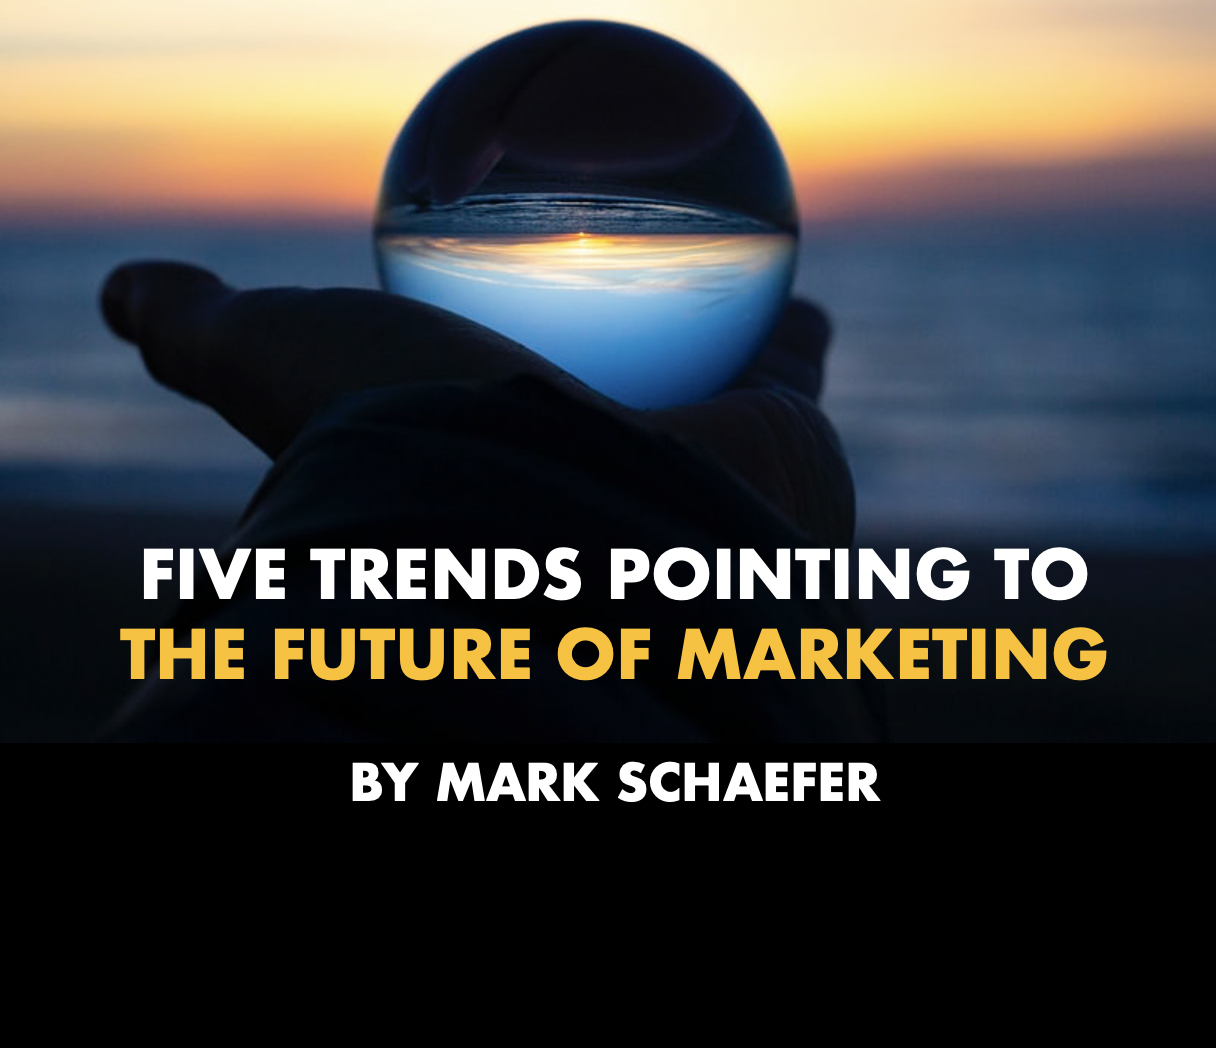 Five significant trends that point to marketing’s future